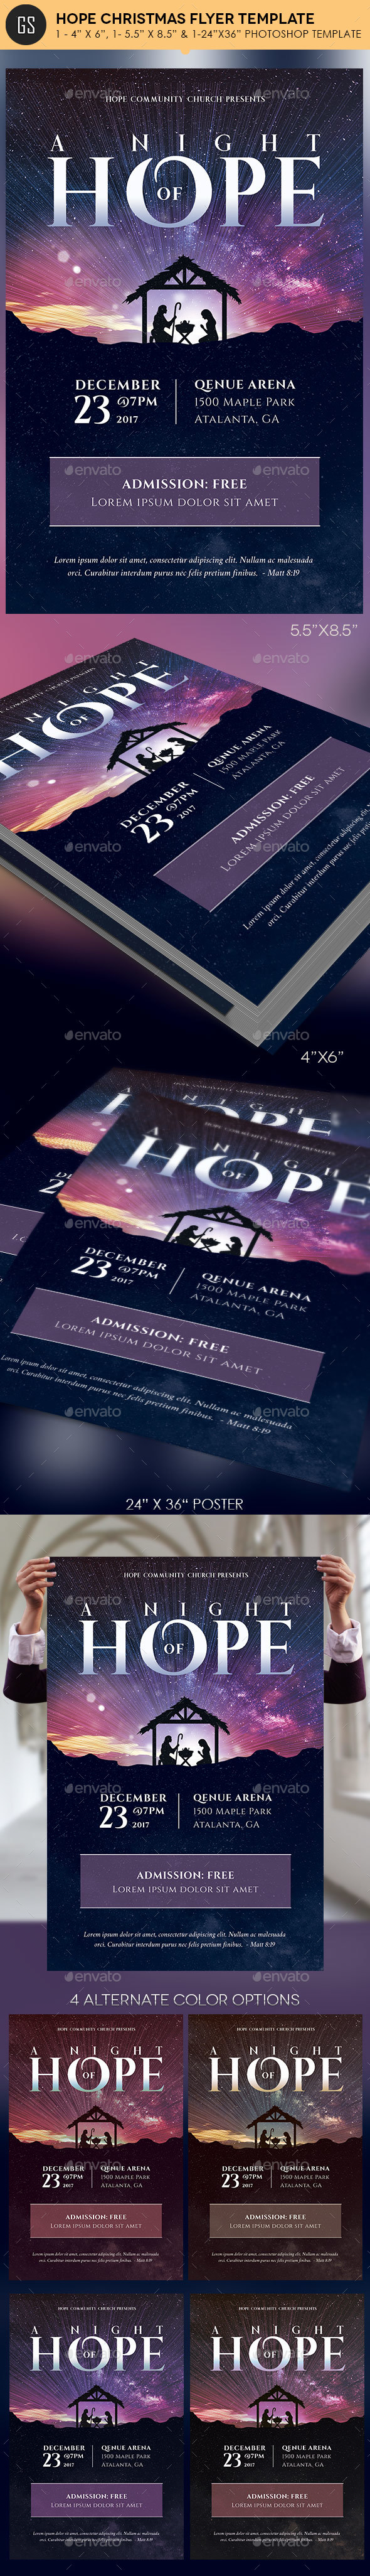 Hope Christmas Flyer Poster Template